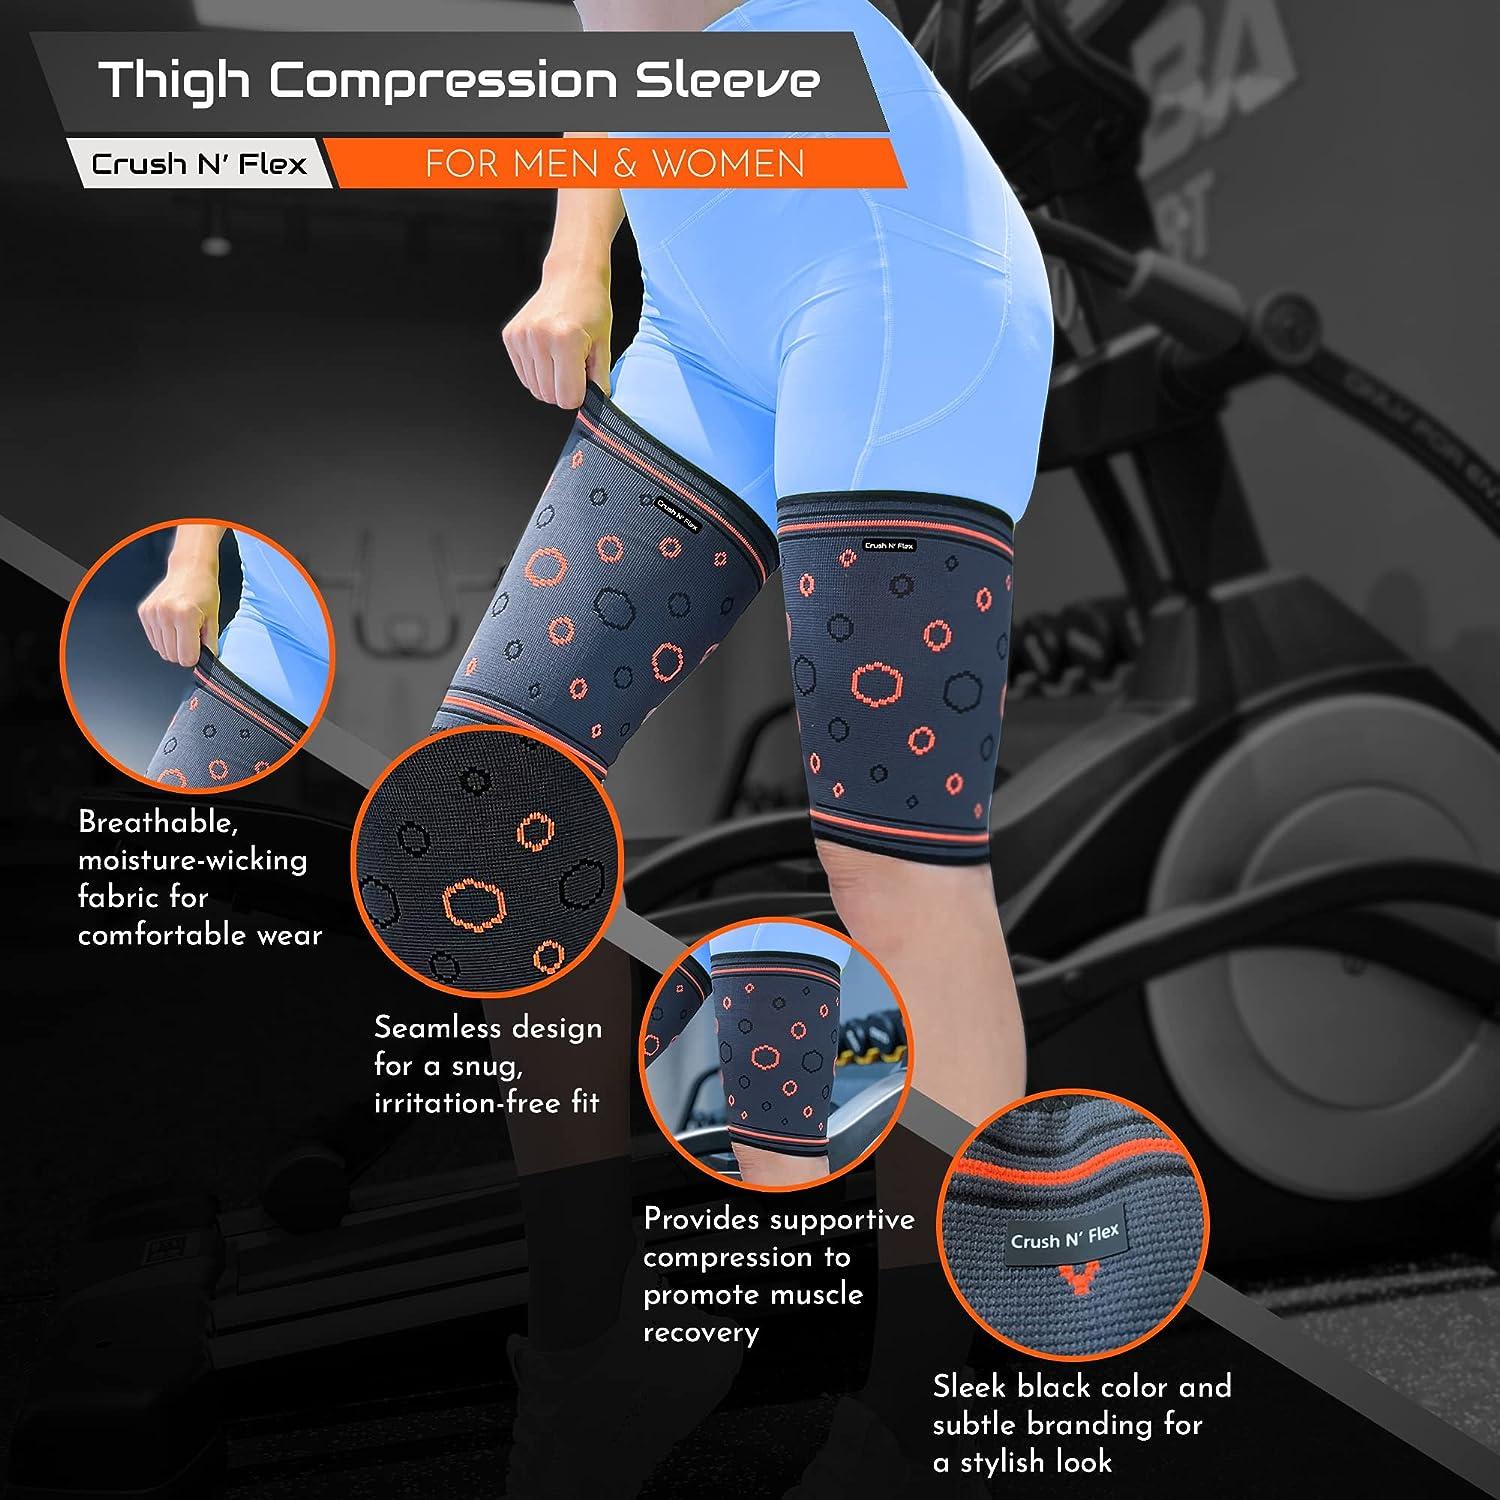 Thigh Compression Sleeve For Women